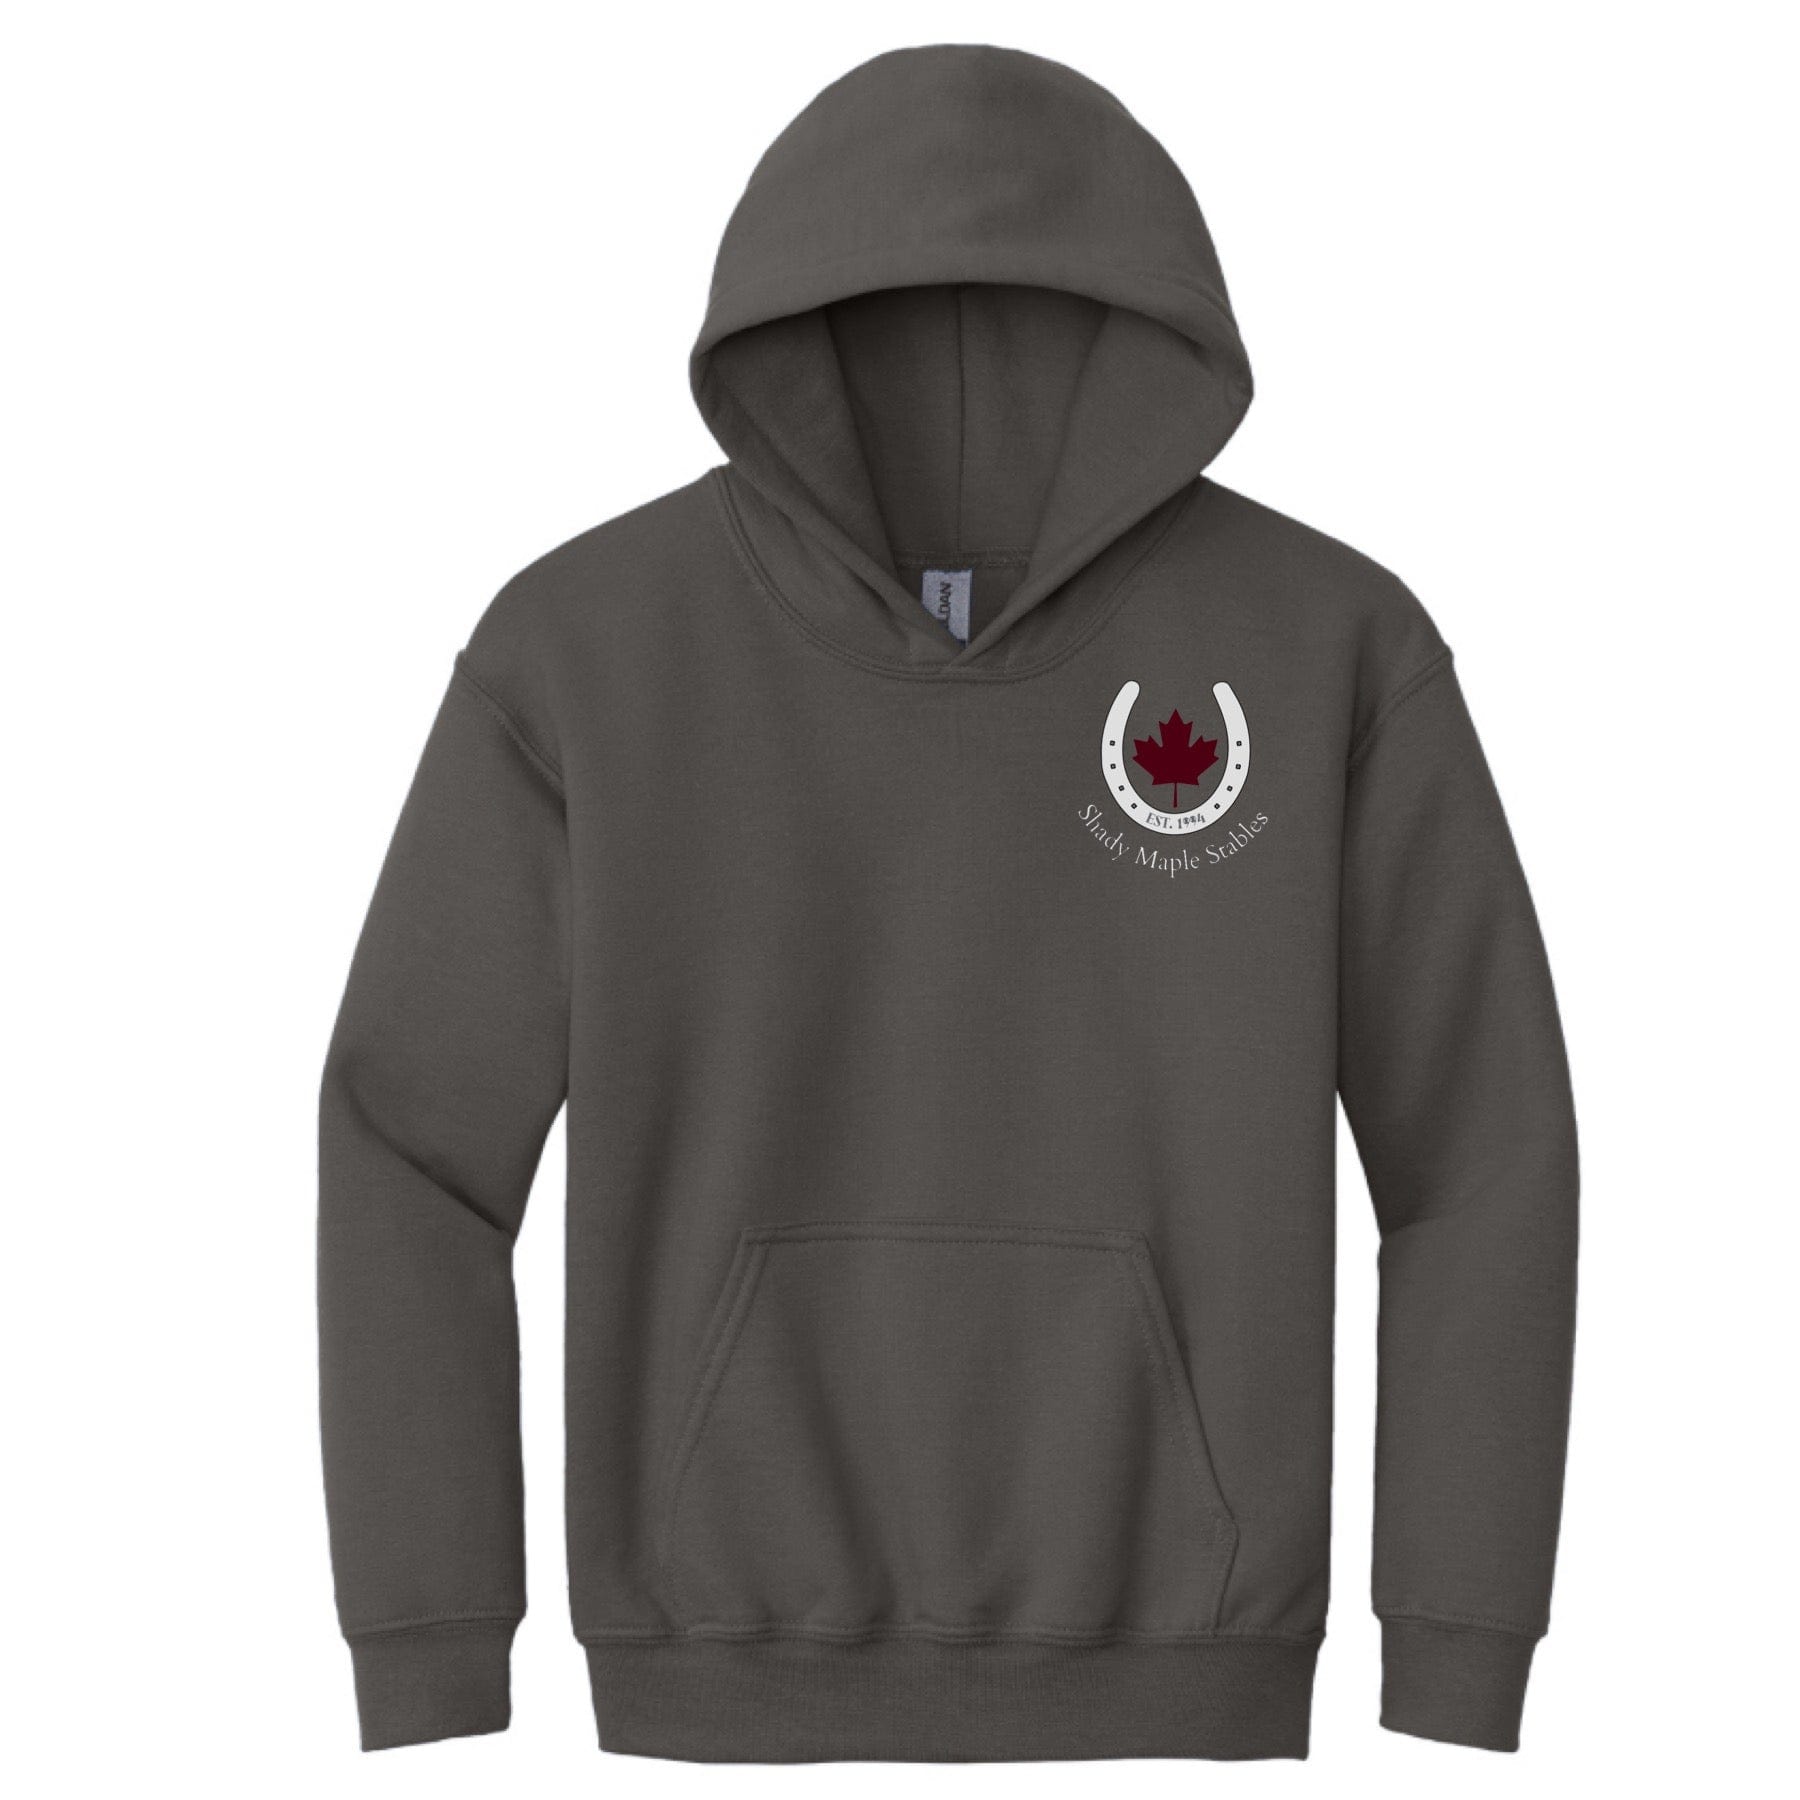 Equestrian Team Apparel Shady Maple Stables Hoodies equestrian team apparel online tack store mobile tack store custom farm apparel custom show stable clothing equestrian lifestyle horse show clothing riding clothes horses equestrian tack store